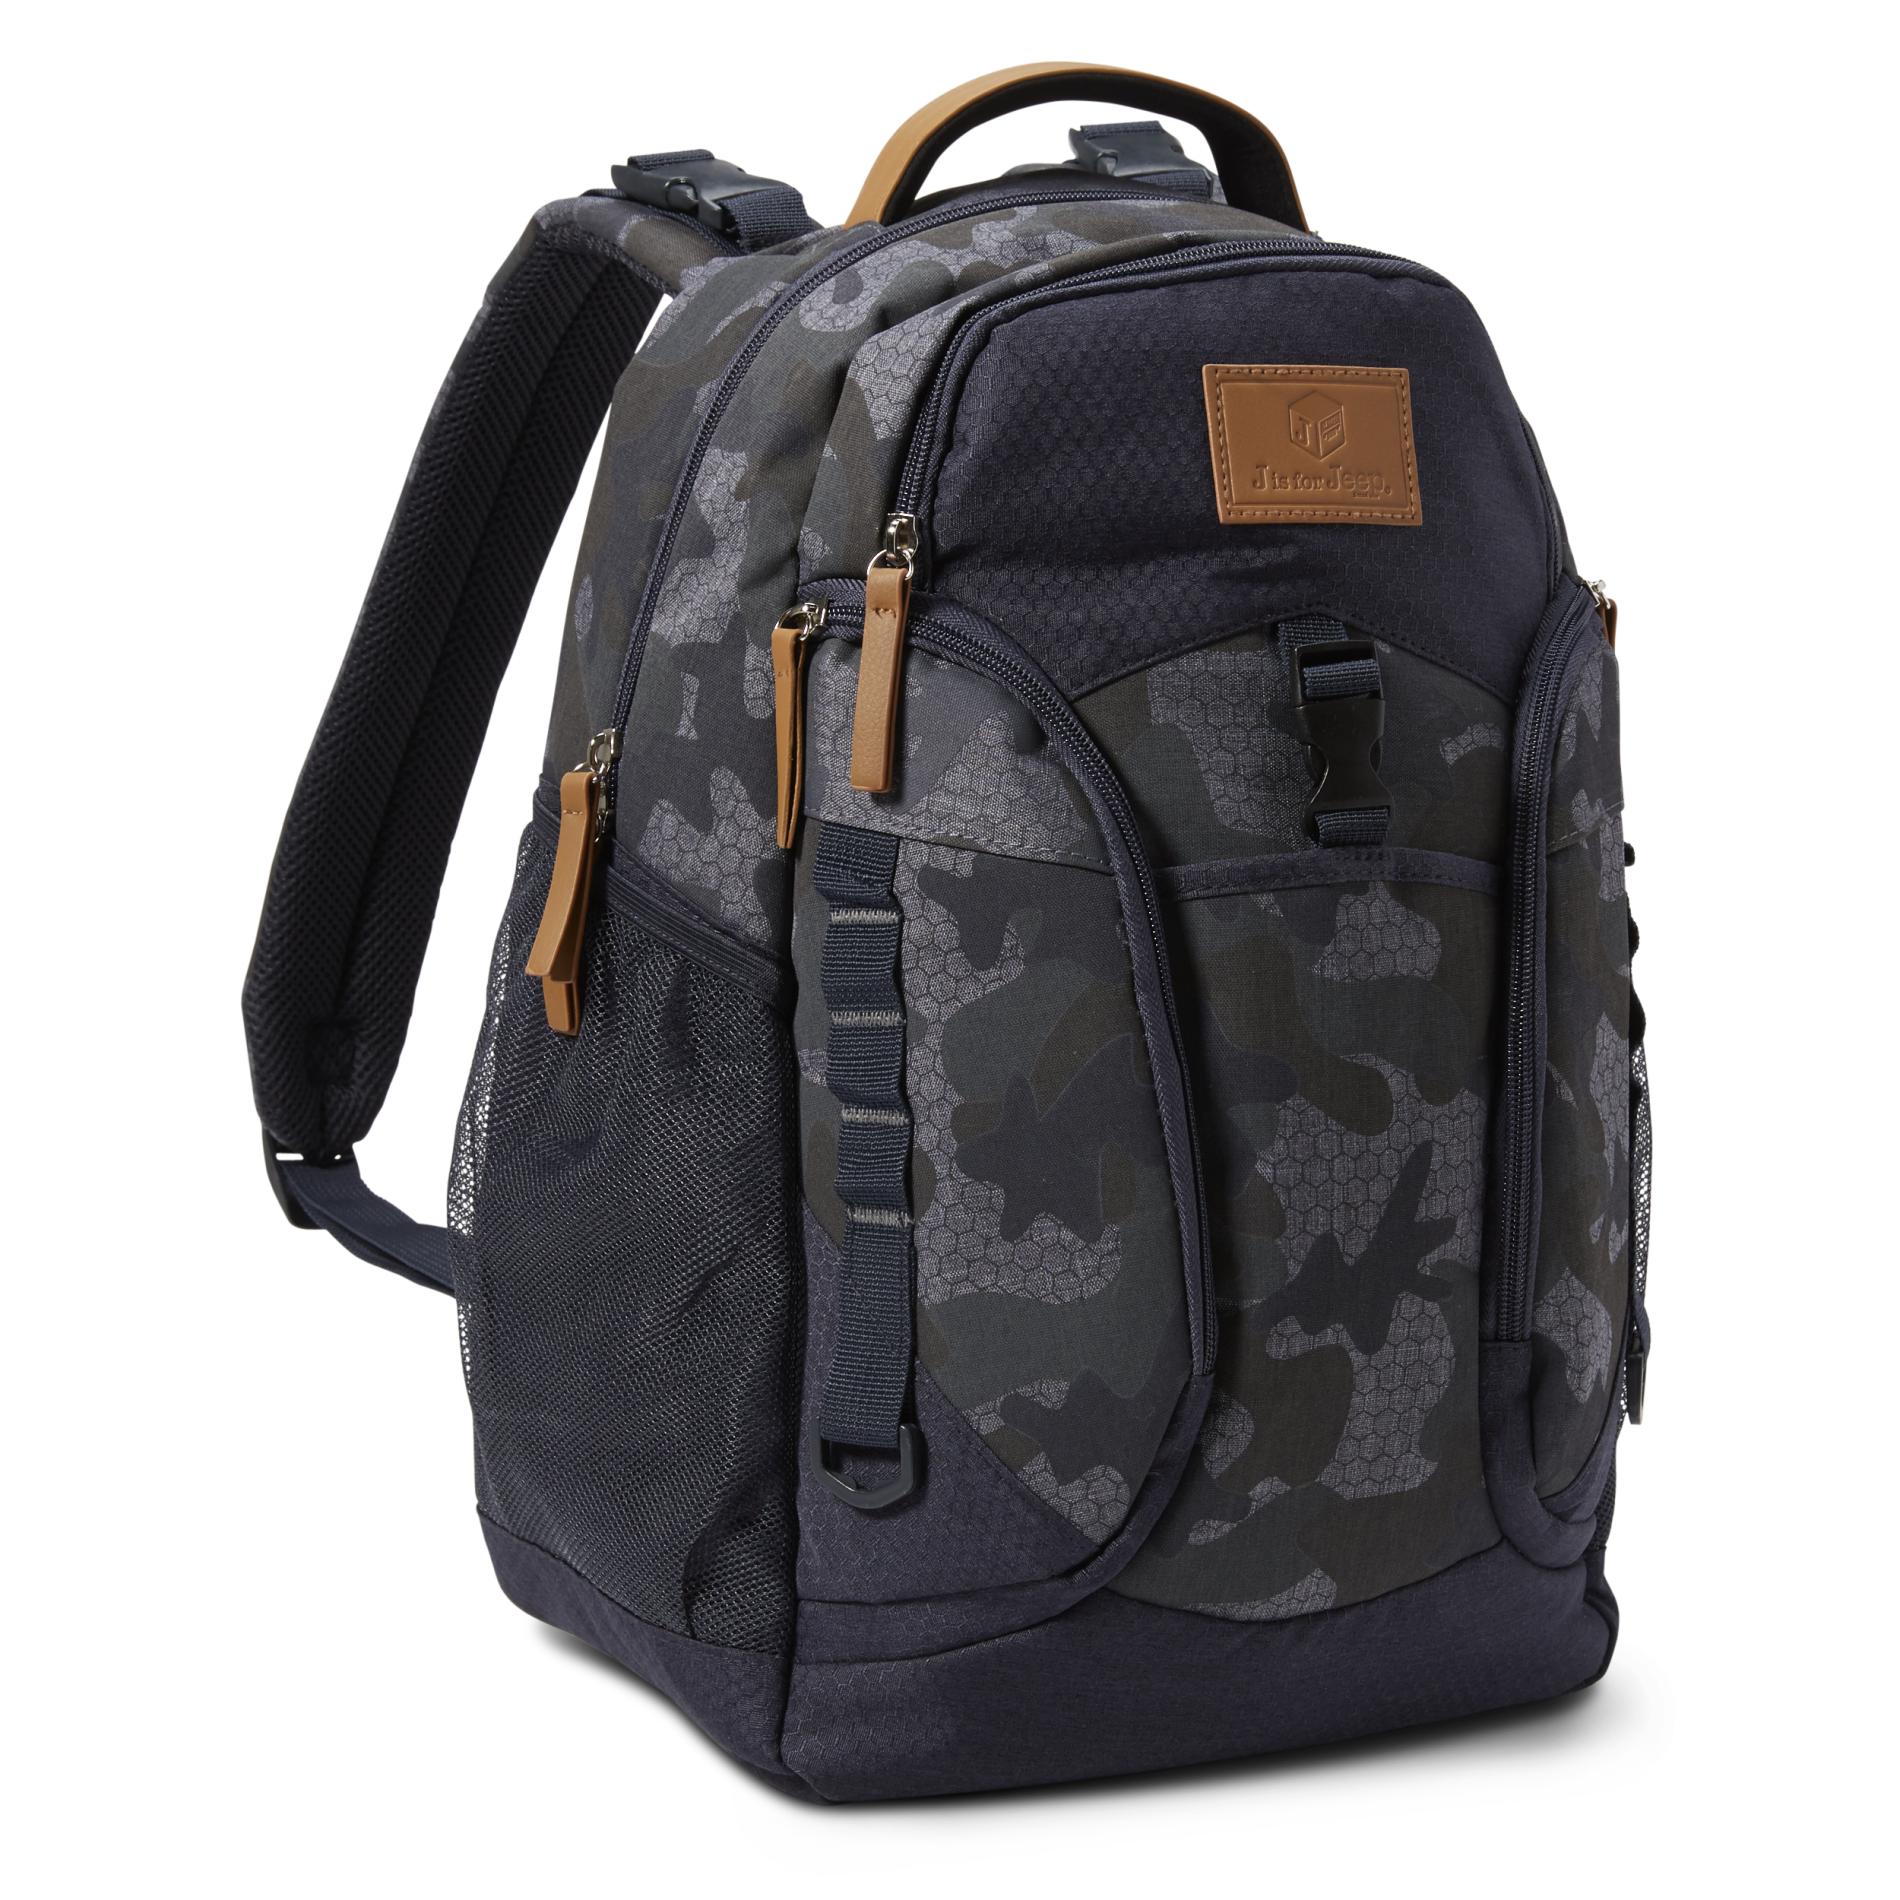 Jeep Backpack Diaper Bag & Changing Pad - Camouflage